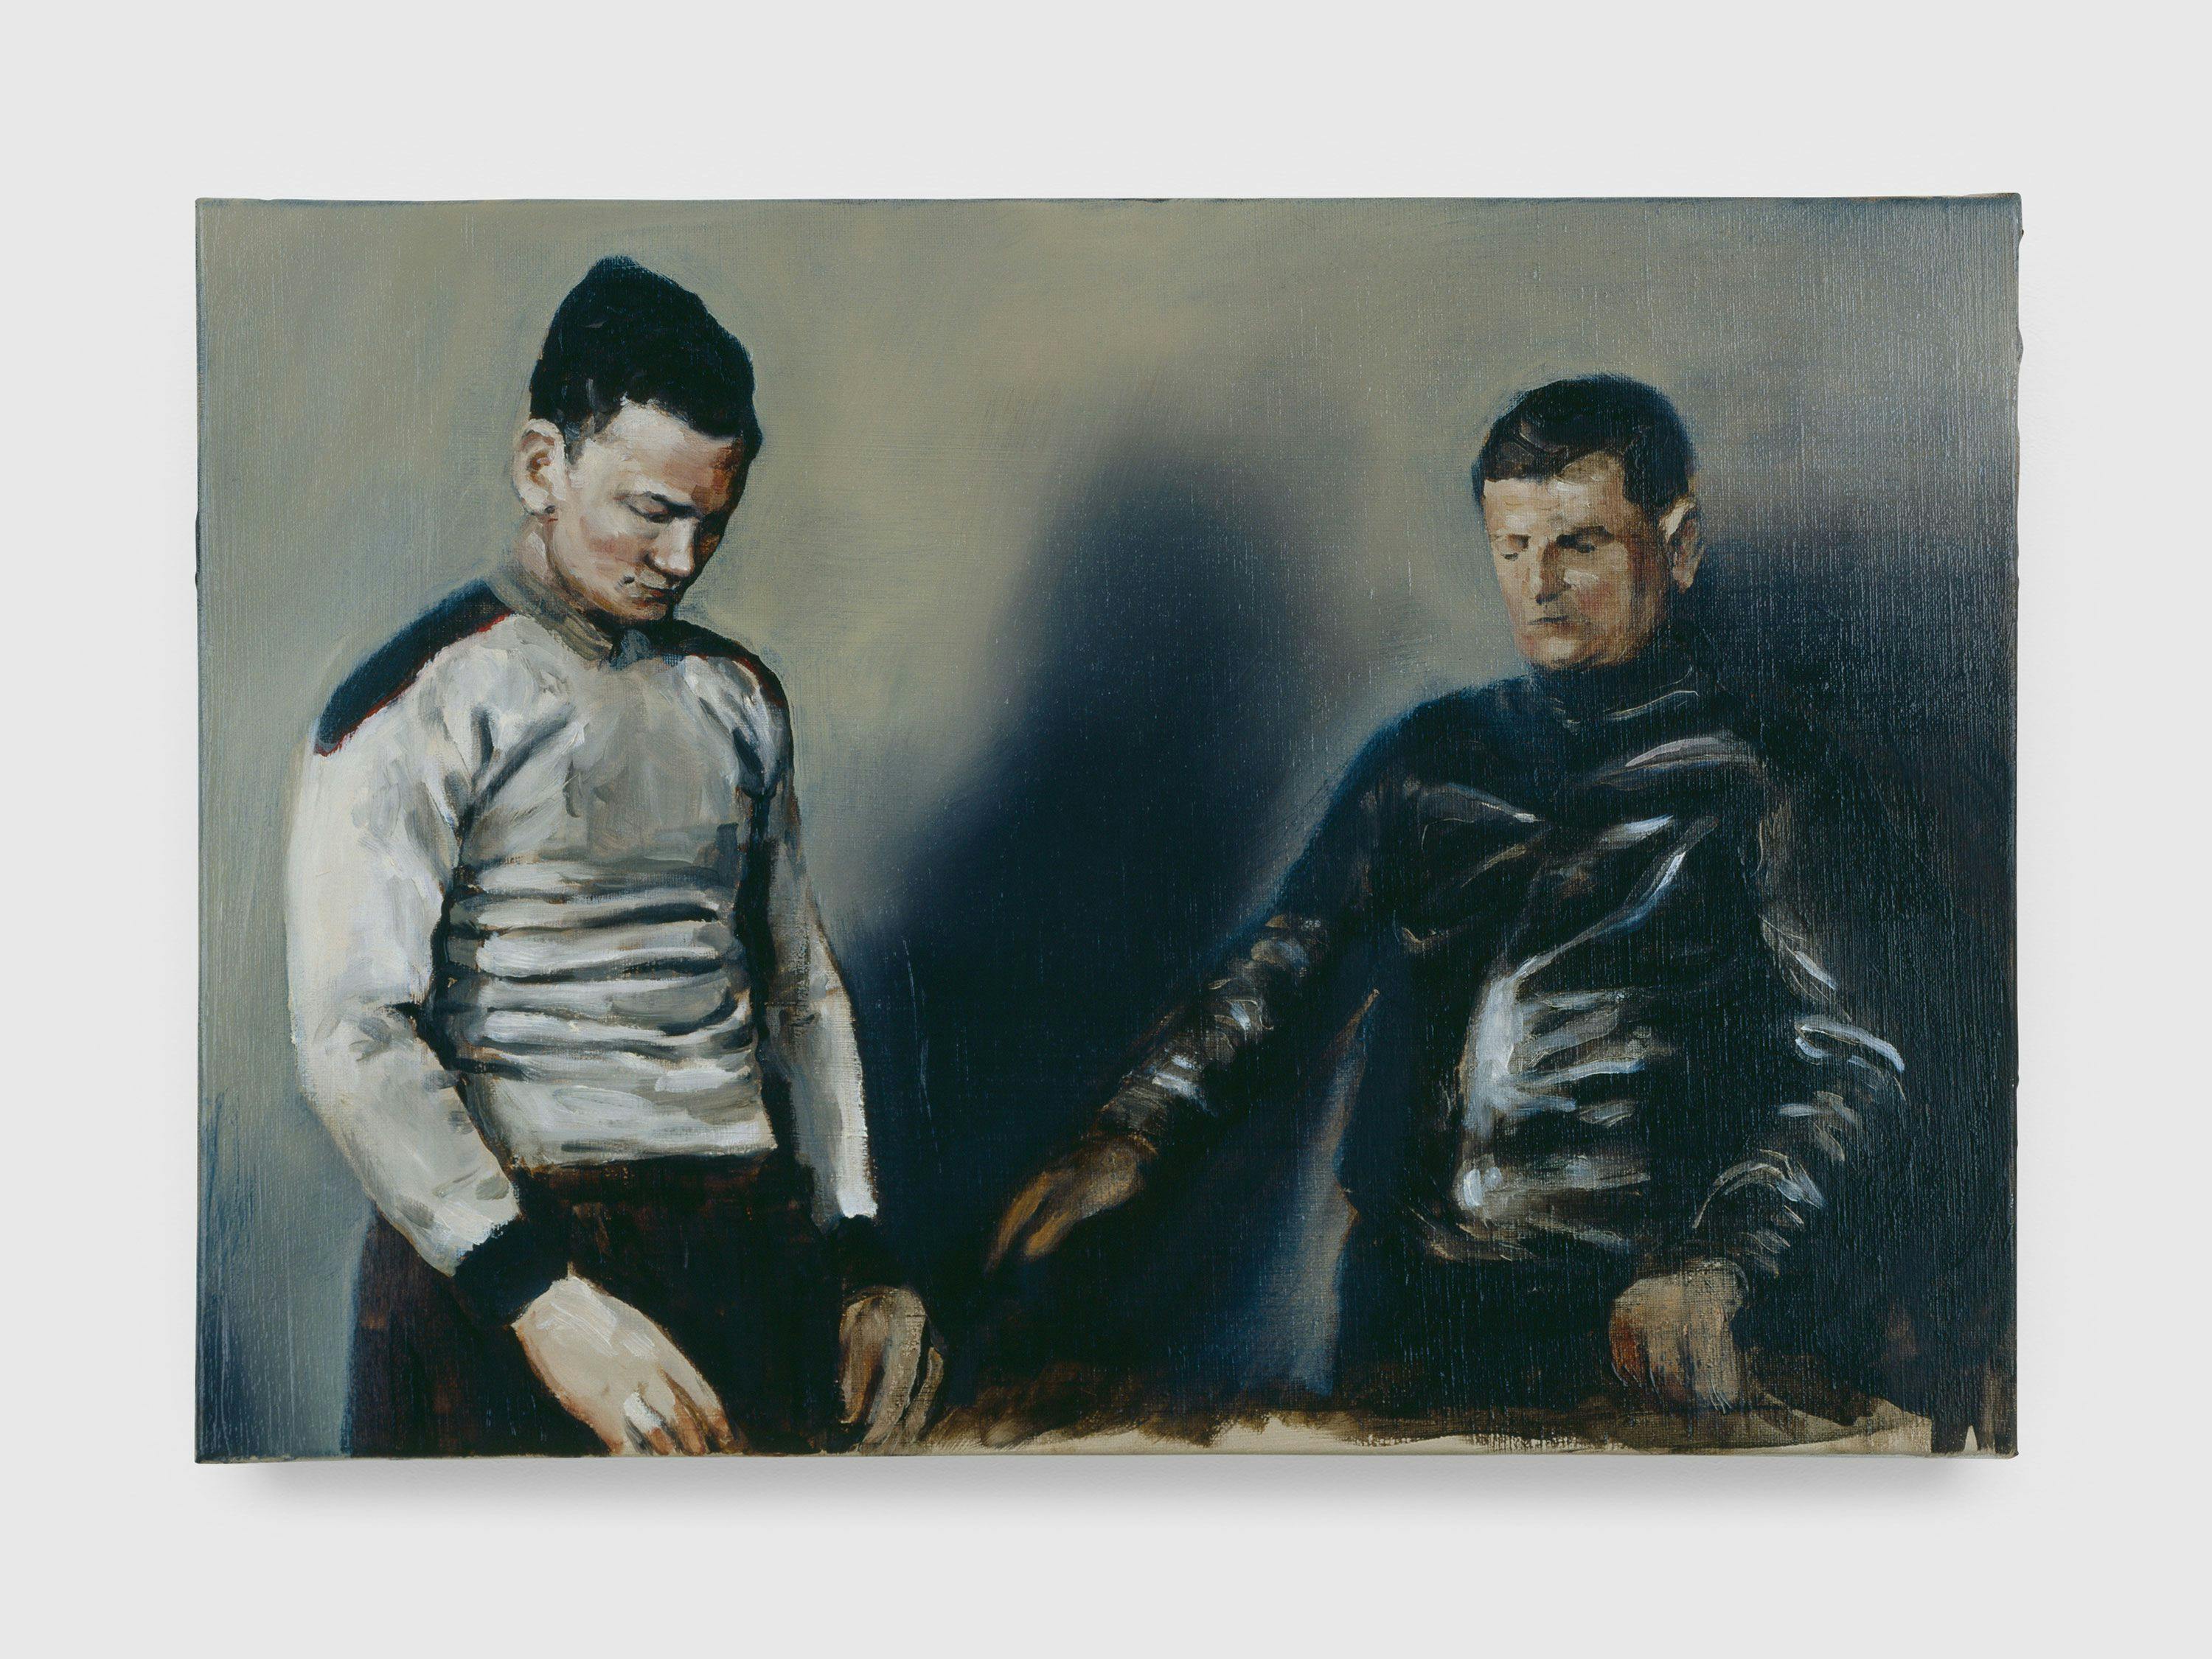 A painting by Michaël Borremans, titled The Soil - (II), dated 2002.